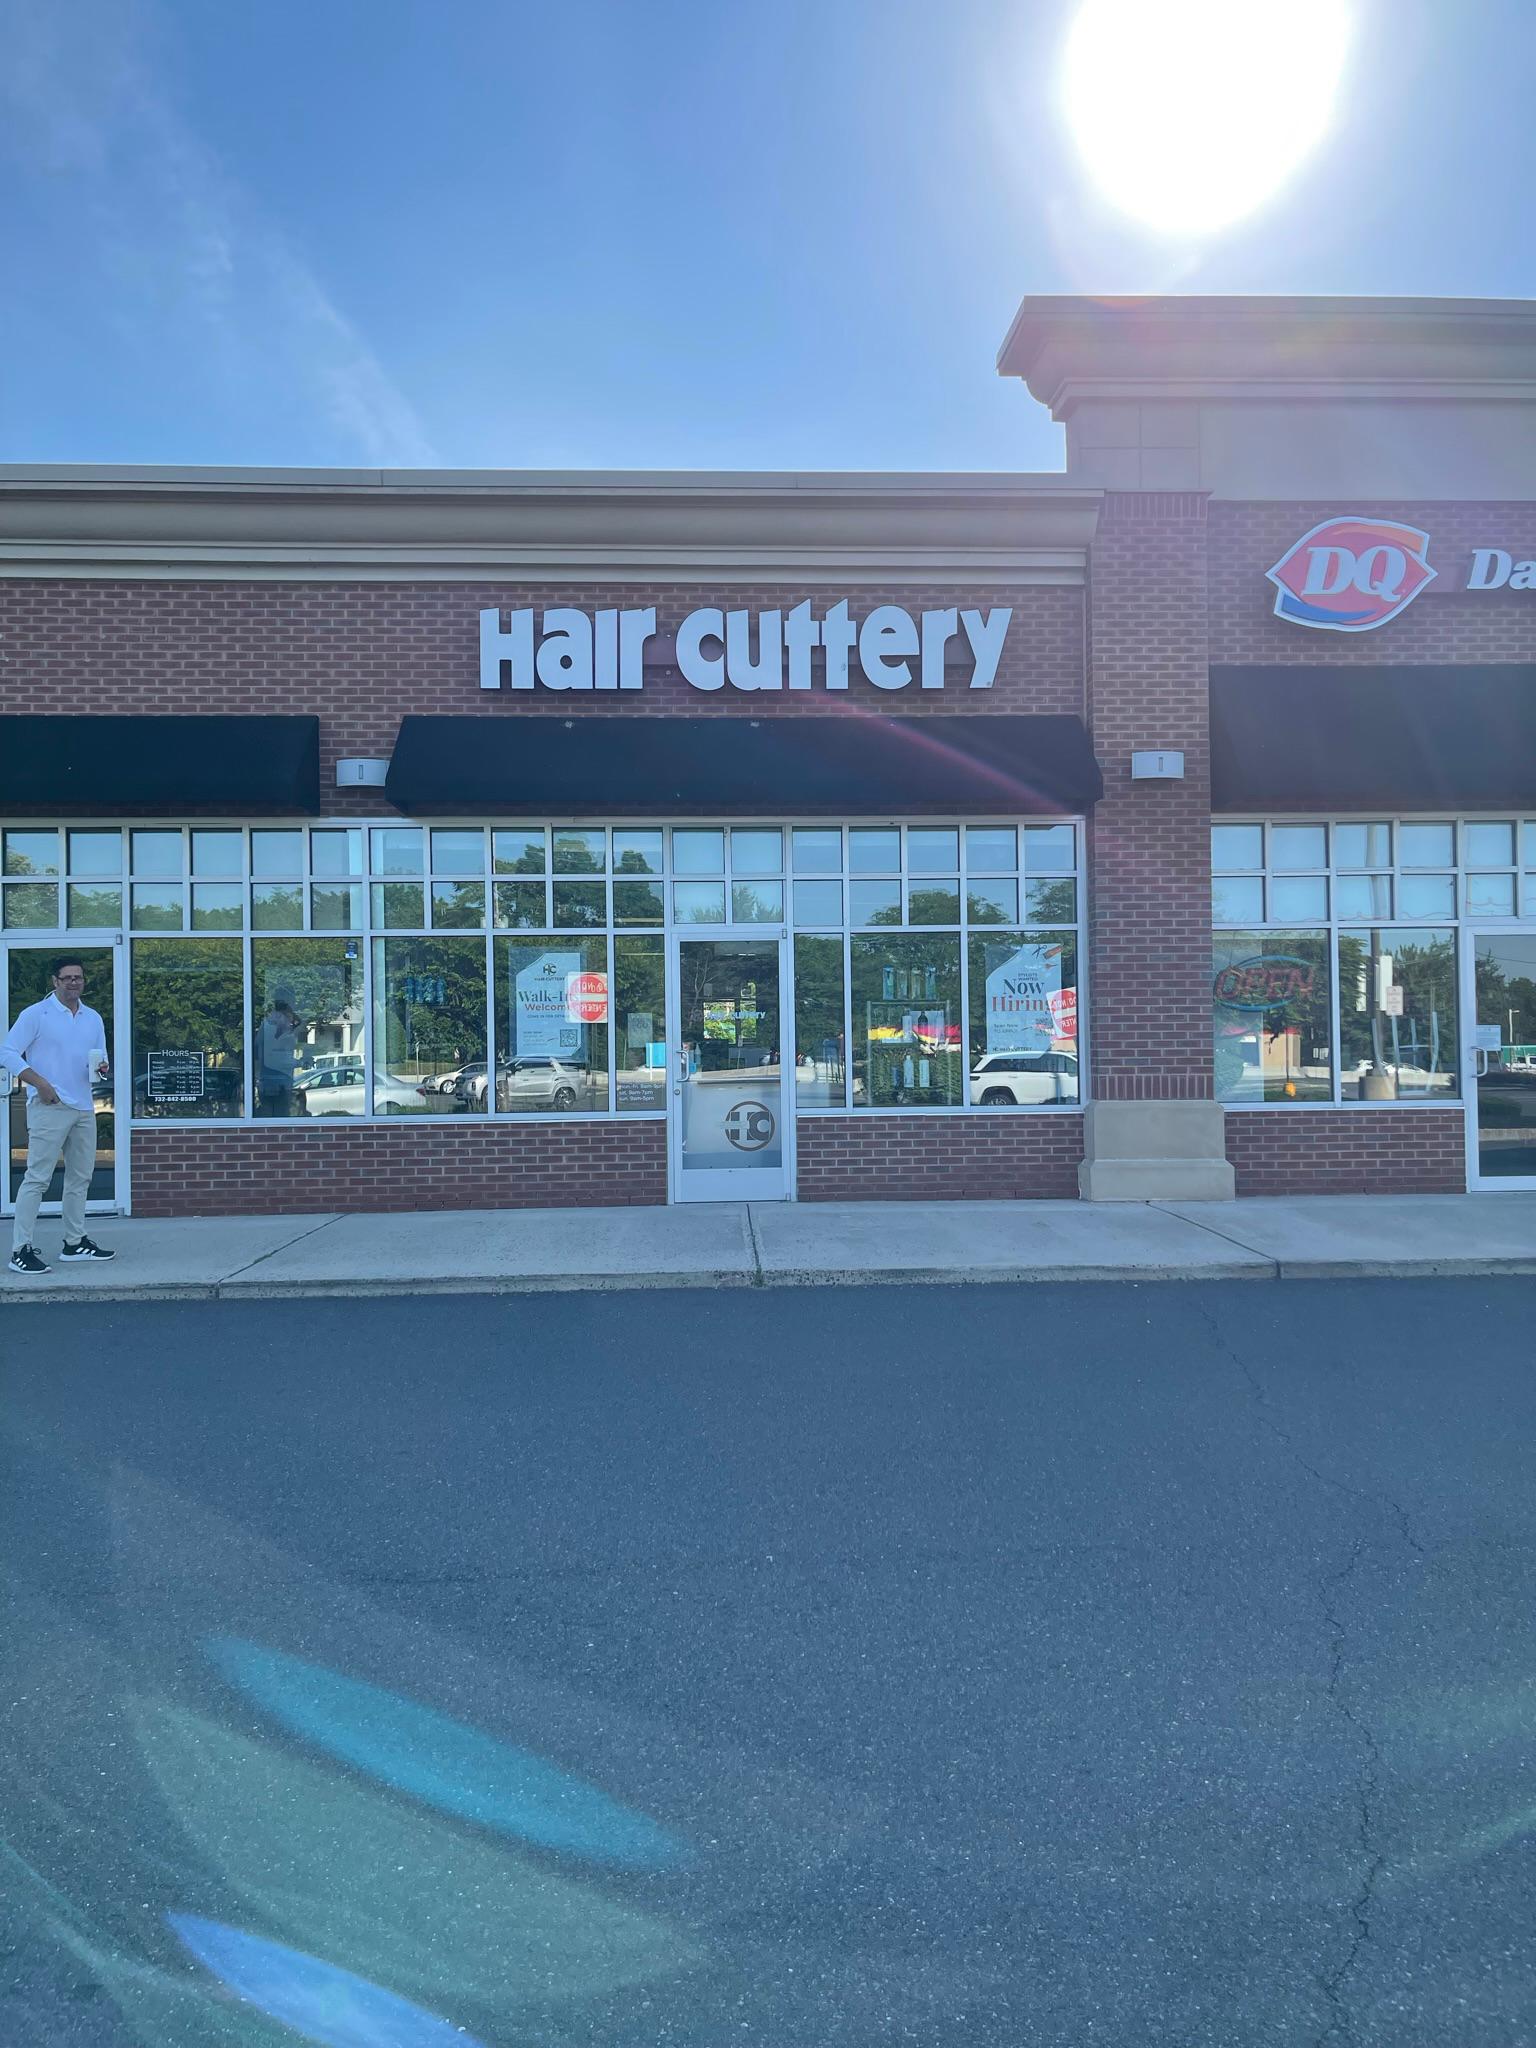 The front entrance of Hair Cuttery at Chapel Hill SC.